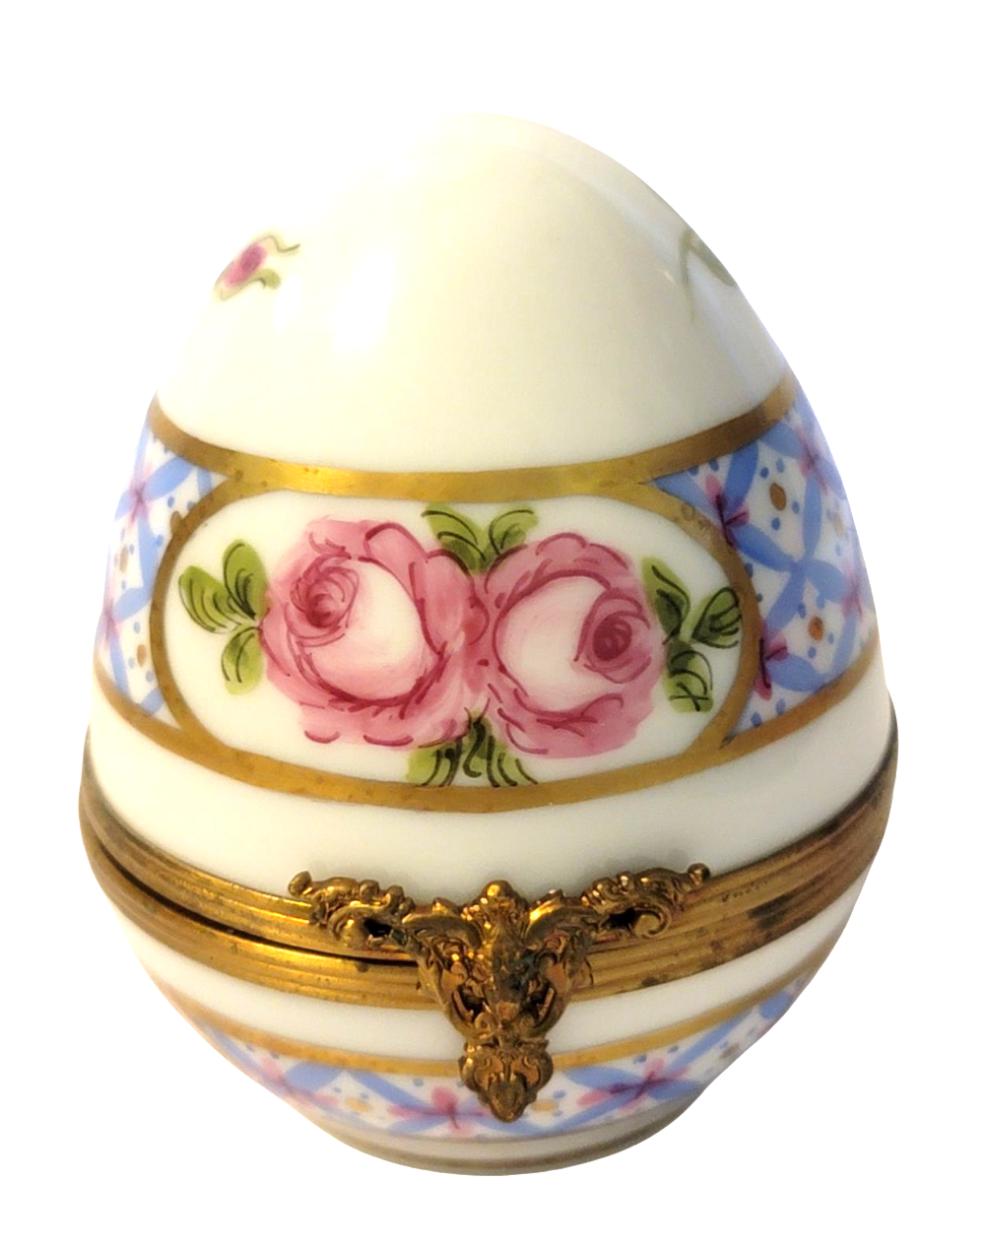 Vintage Easter egg in stunning blue with intricate rose and flower design